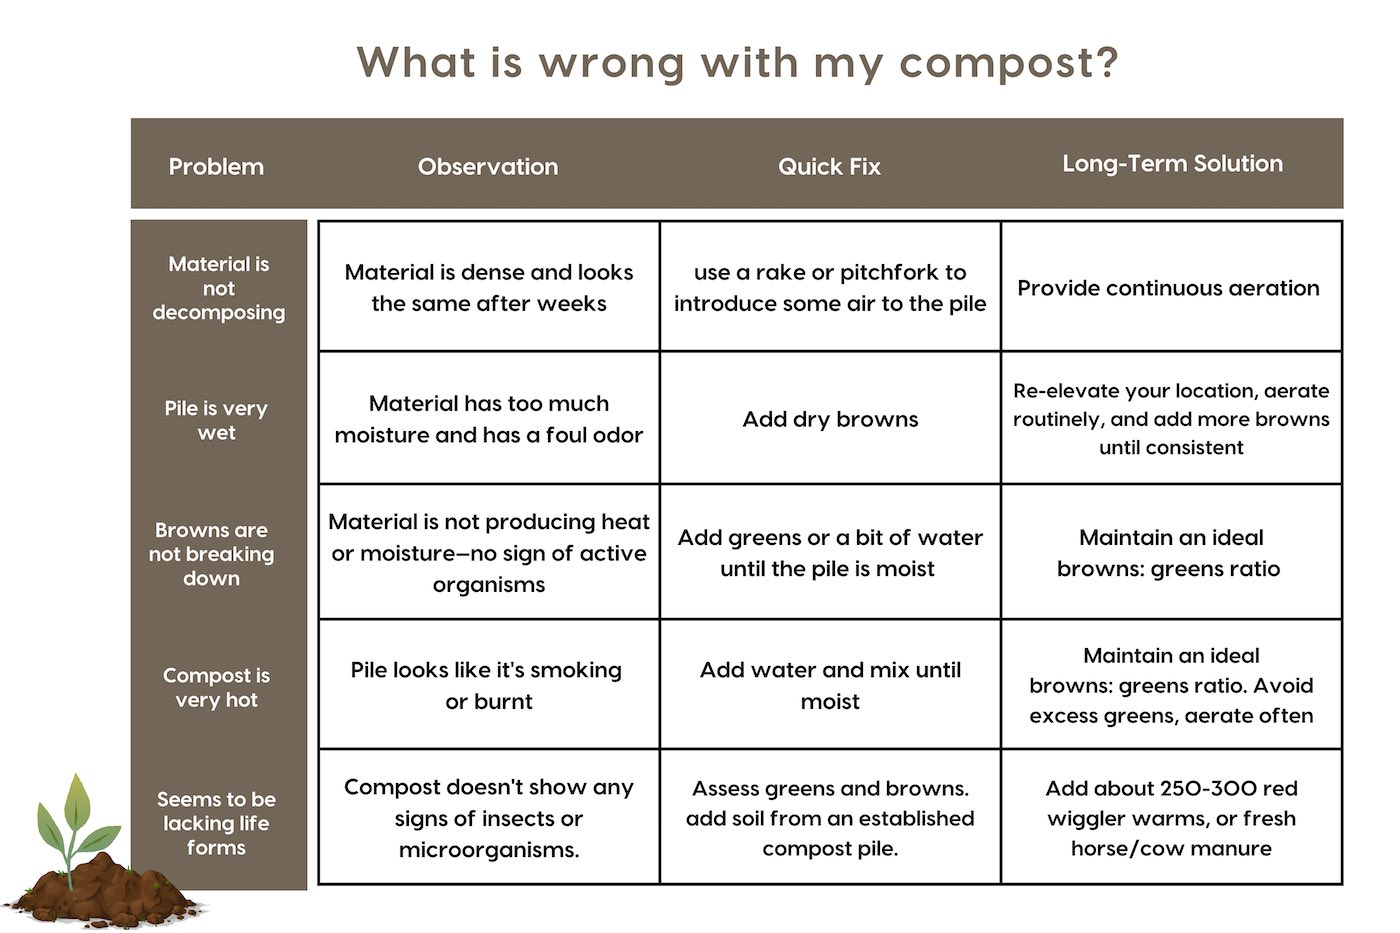 What is wrong with my compost?